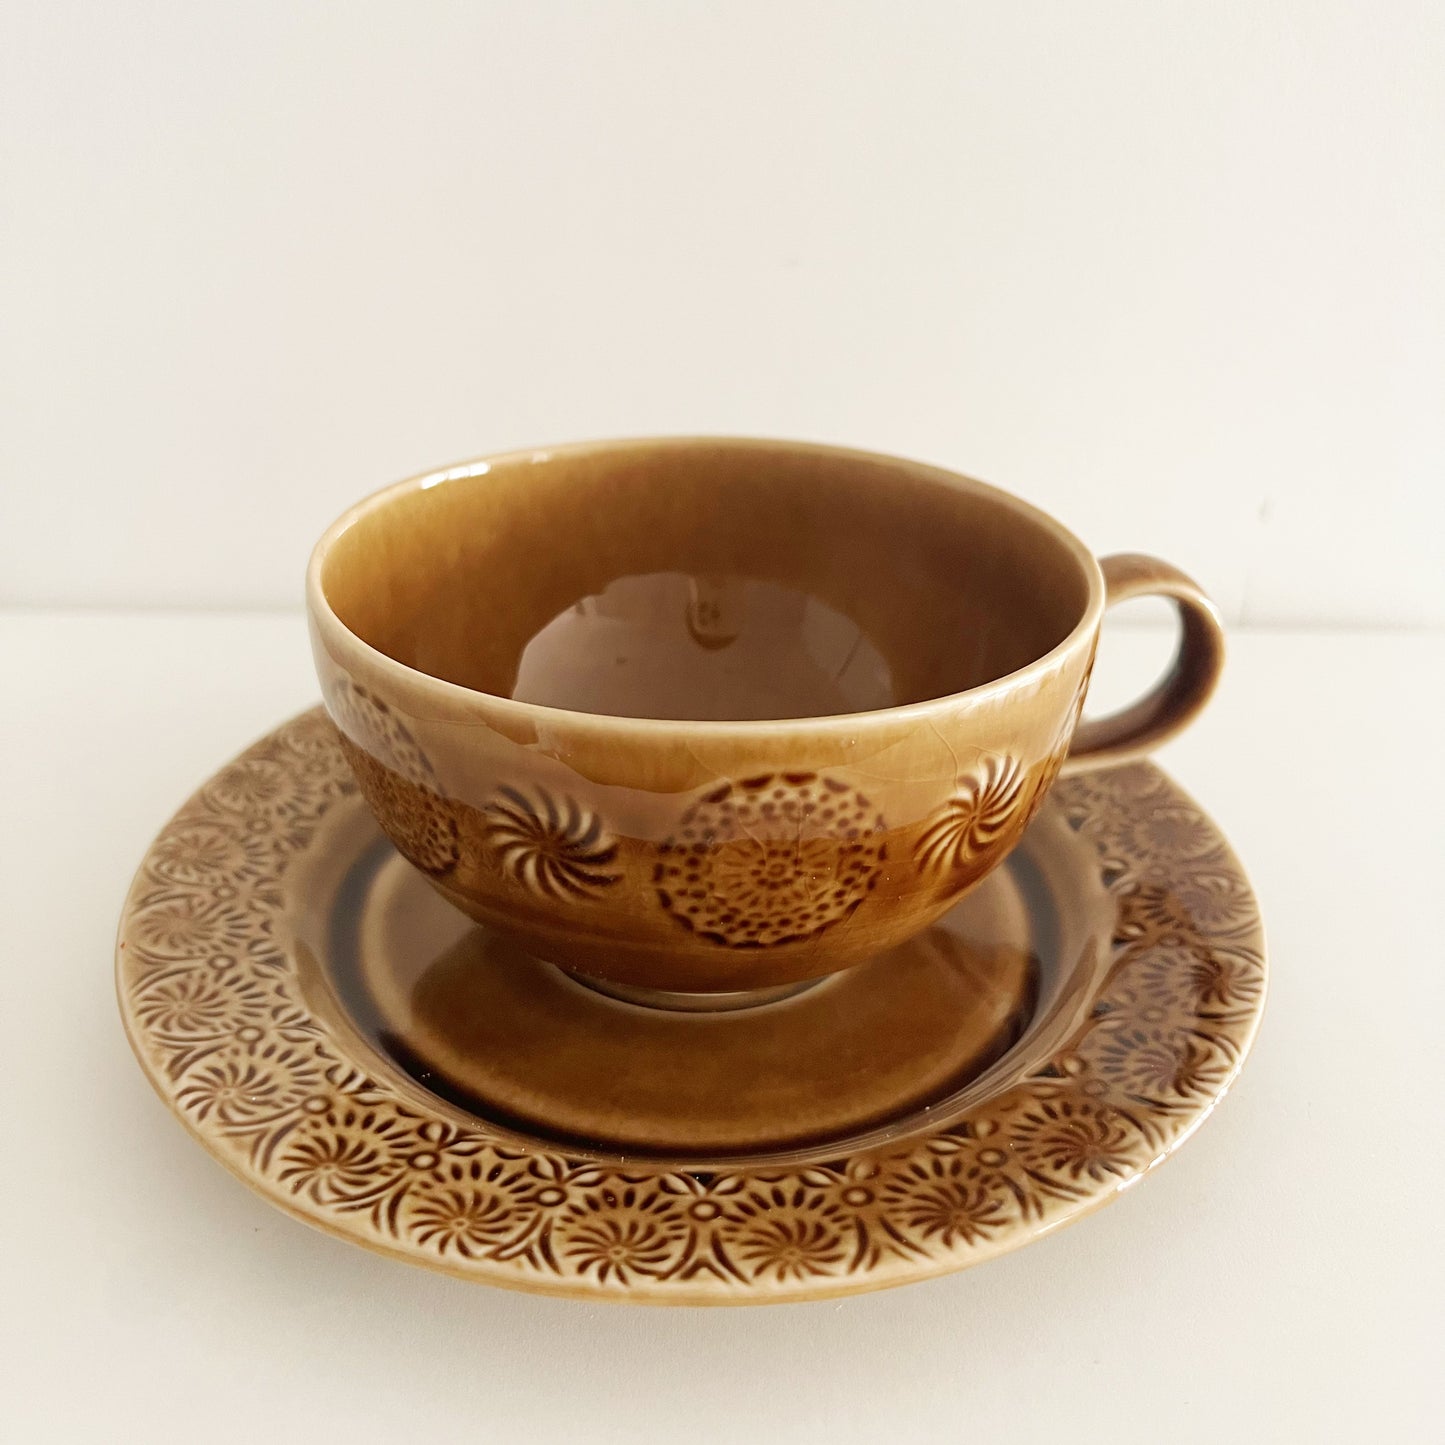 Stamp pair cups and saucers gift set